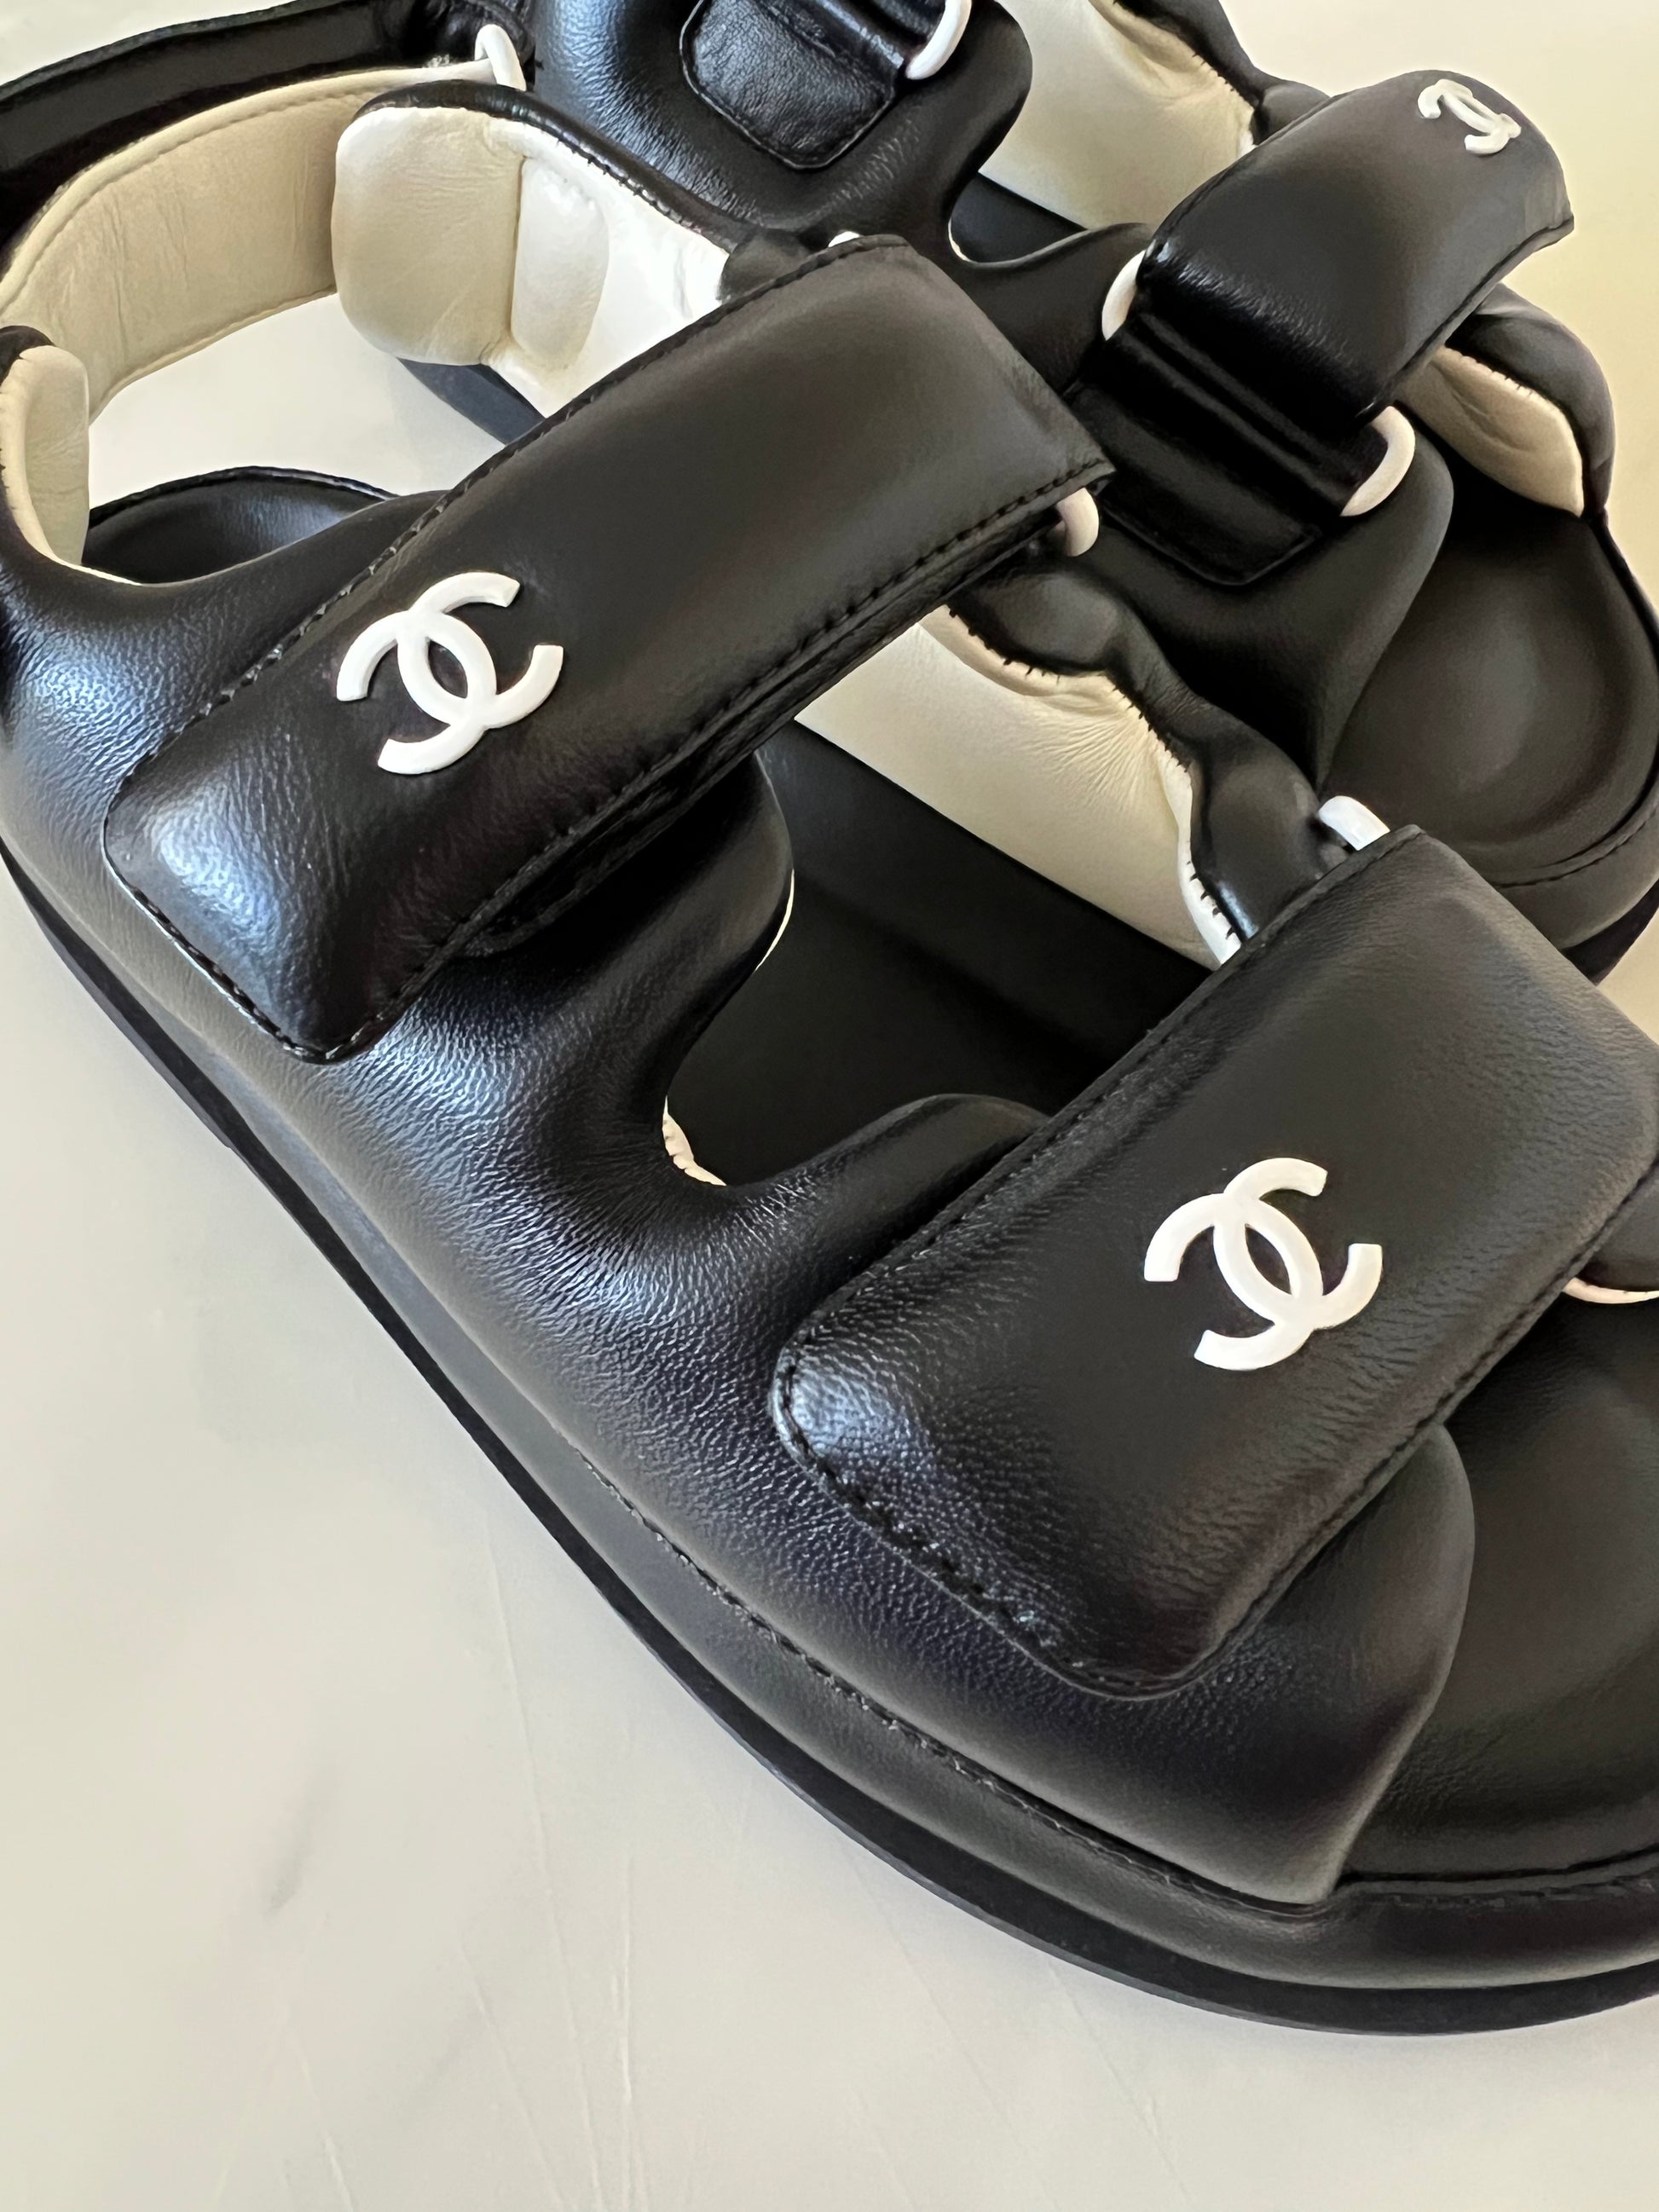 Leather sandals Chanel Black size 37 EU in Leather - 25271948